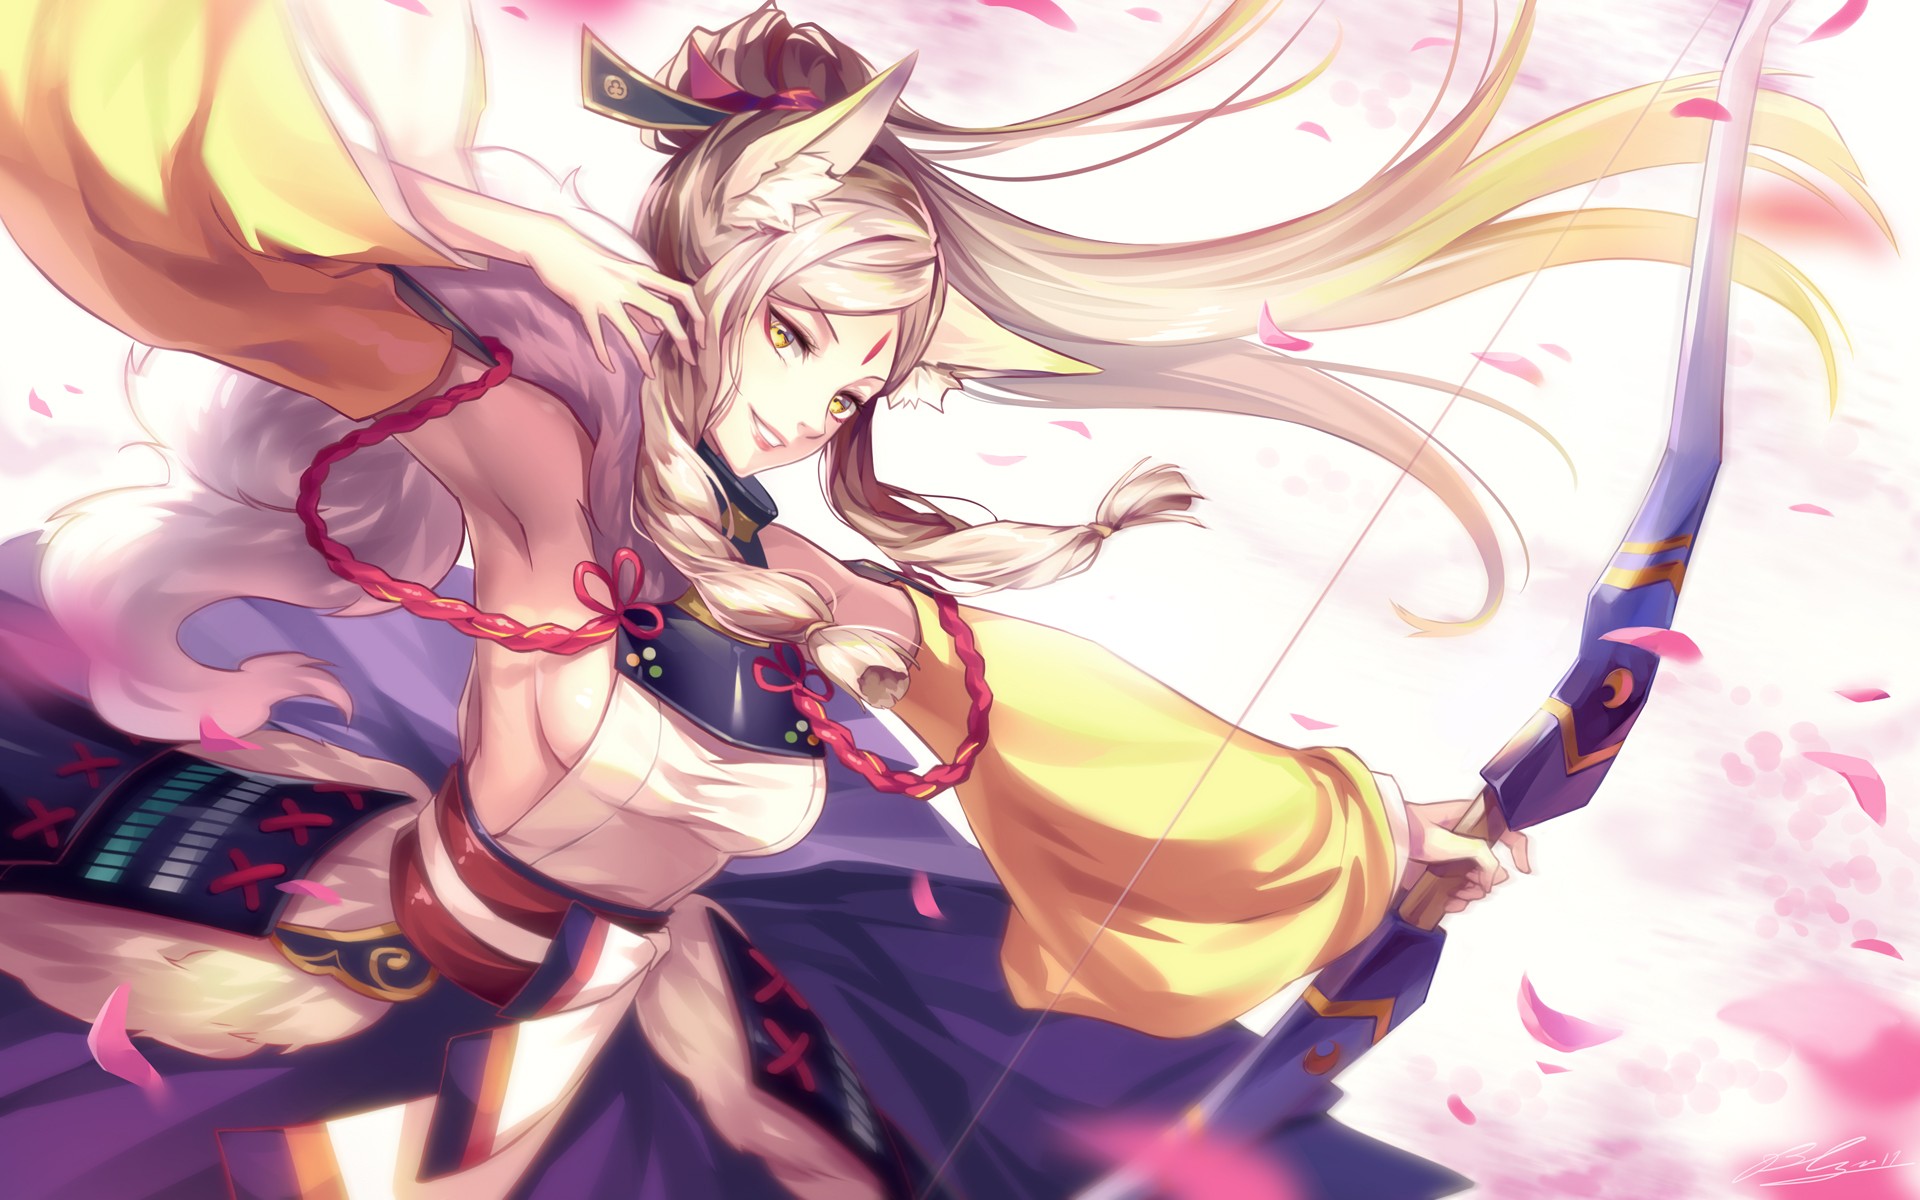 Sousei No Onmyouji Animal Ears Blonde Cherry Blossom Petals Arch Archer 1920x1200